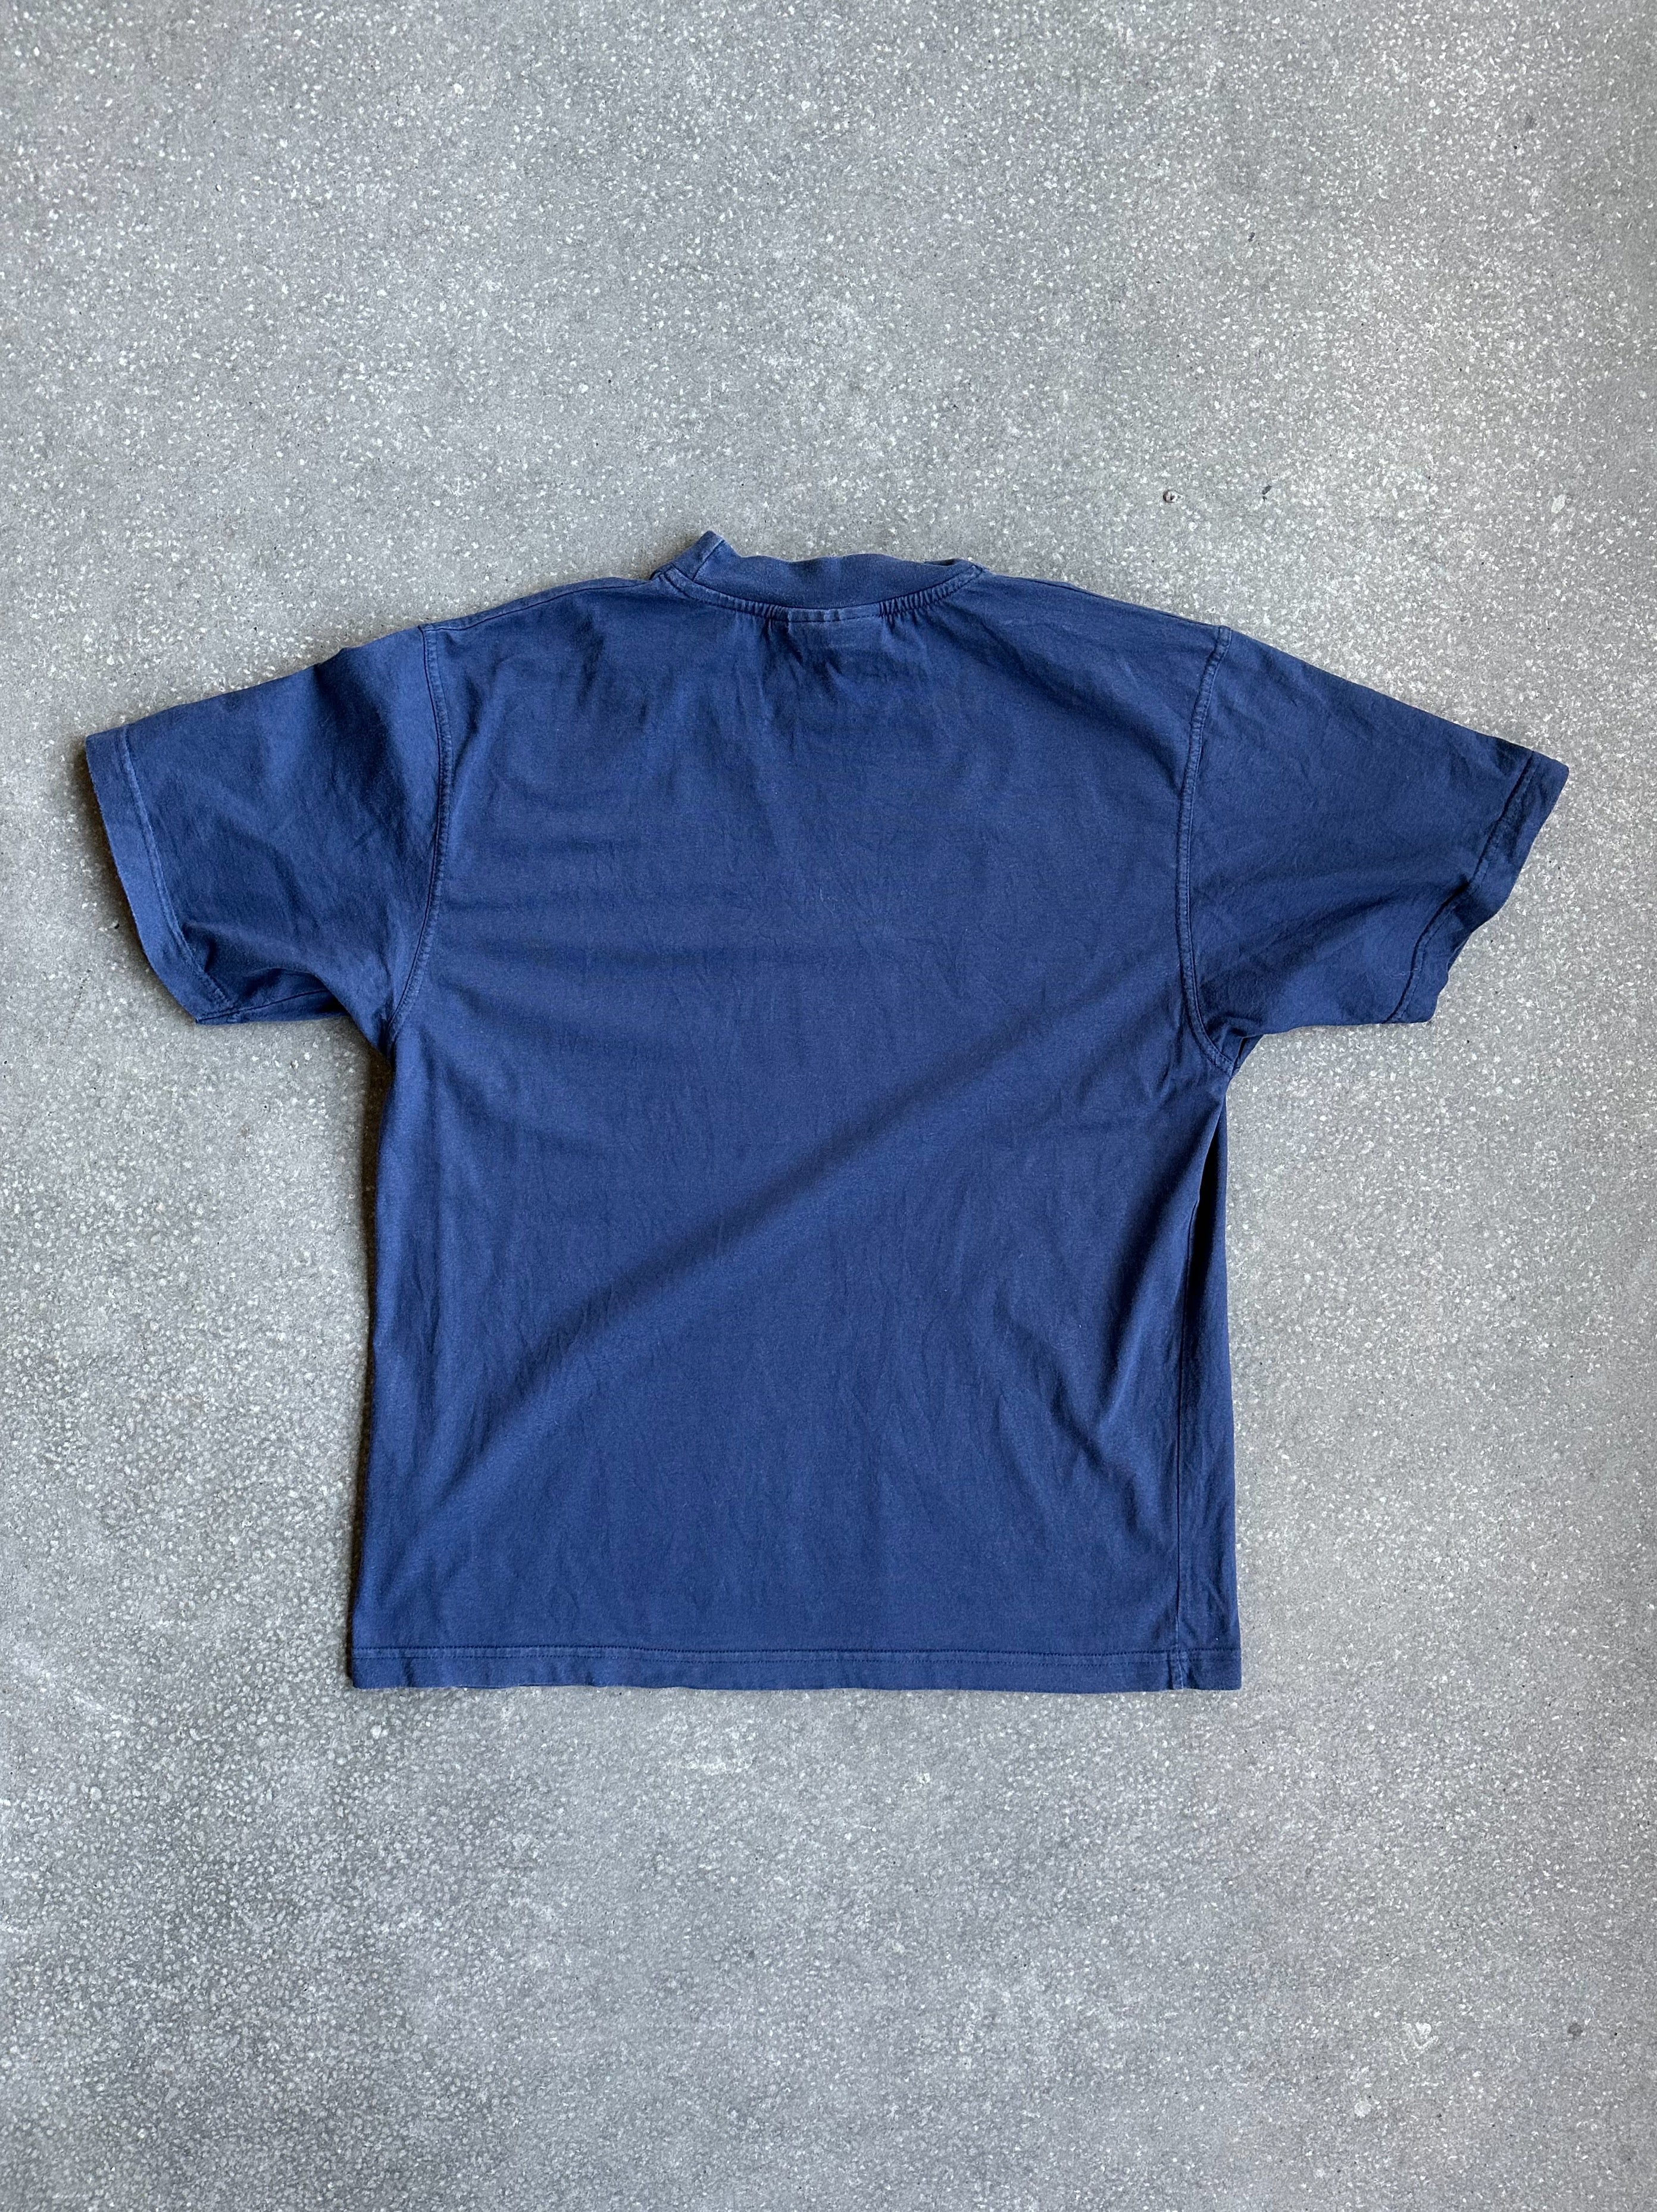 Vintage Quiksilver Tee - Small